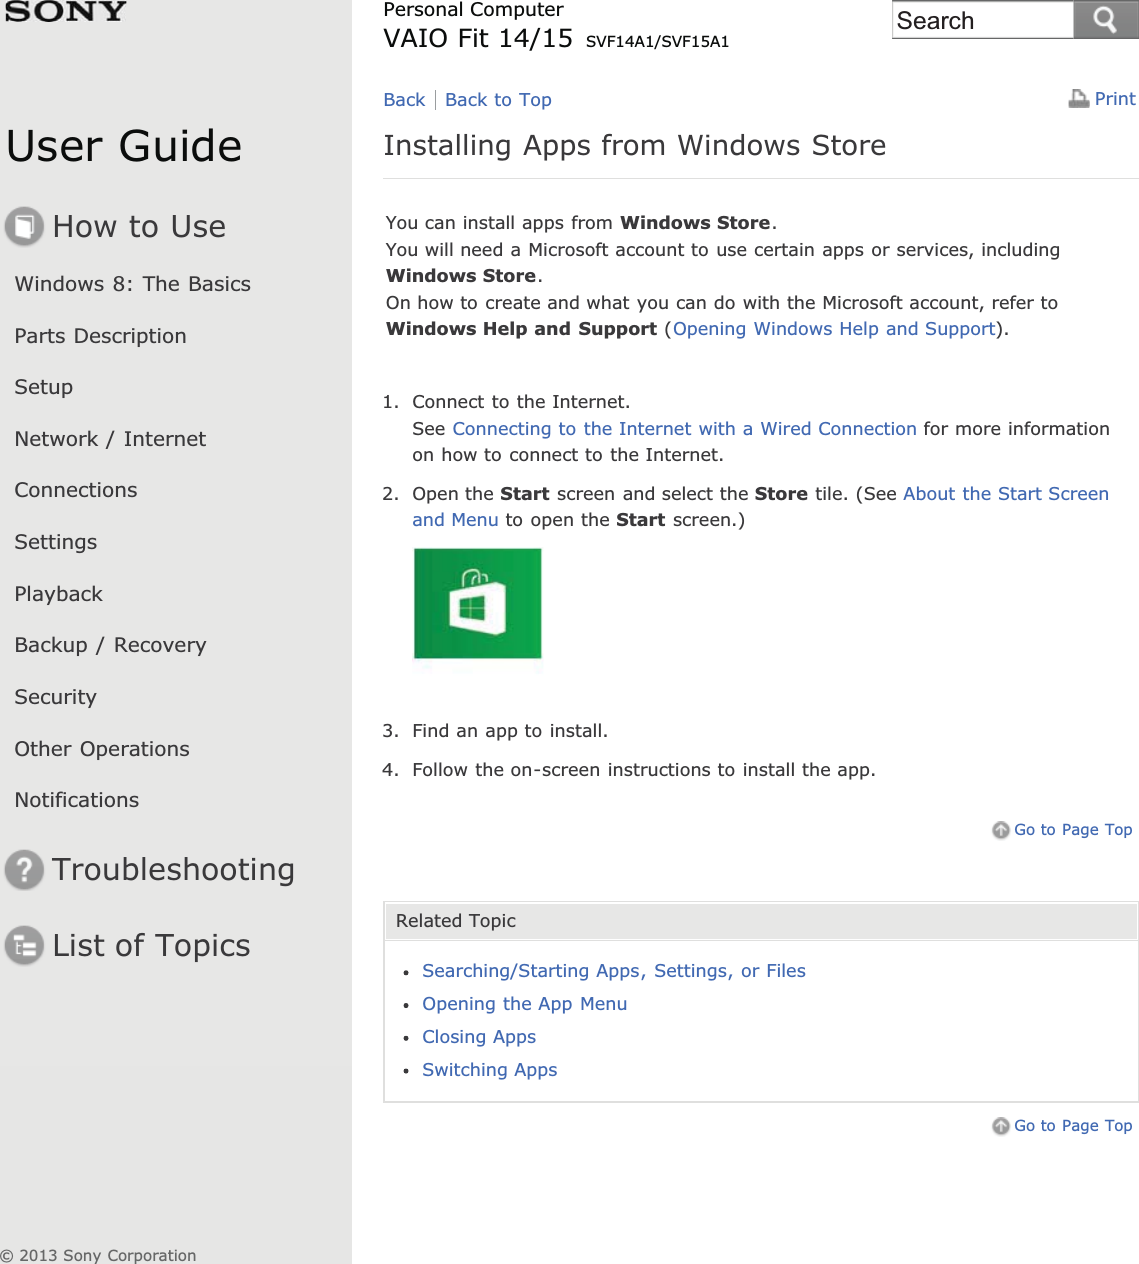 User GuideHow to UseWindows 8: The BasicsParts DescriptionSetupNetwork / InternetConnectionsSettingsPlaybackBackup / RecoverySecurityOther OperationsNotificationsTroubleshootingList of TopicsPrintPersonal ComputerVAIO Fit 14/15 SVF14A1/SVF15A1Installing Apps from Windows StoreYou can install apps from Windows Store.You will need a Microsoft account to use certain apps or services, includingWindows Store.On how to create and what you can do with the Microsoft account, refer toWindows Help and Support (Opening Windows Help and Support).1. Connect to the Internet.See Connecting to the Internet with a Wired Connection for more informationon how to connect to the Internet.2. Open the Start screen and select the Store tile. (See About the Start Screenand Menu to open the Start screen.)3. Find an app to install.4. Follow the on-screen instructions to install the app.Go to Page TopRelated TopicSearching/Starting Apps, Settings, or FilesOpening the App MenuClosing AppsSwitching AppsGo to Page TopBack Back to Top© 2013 Sony CorporationSearch